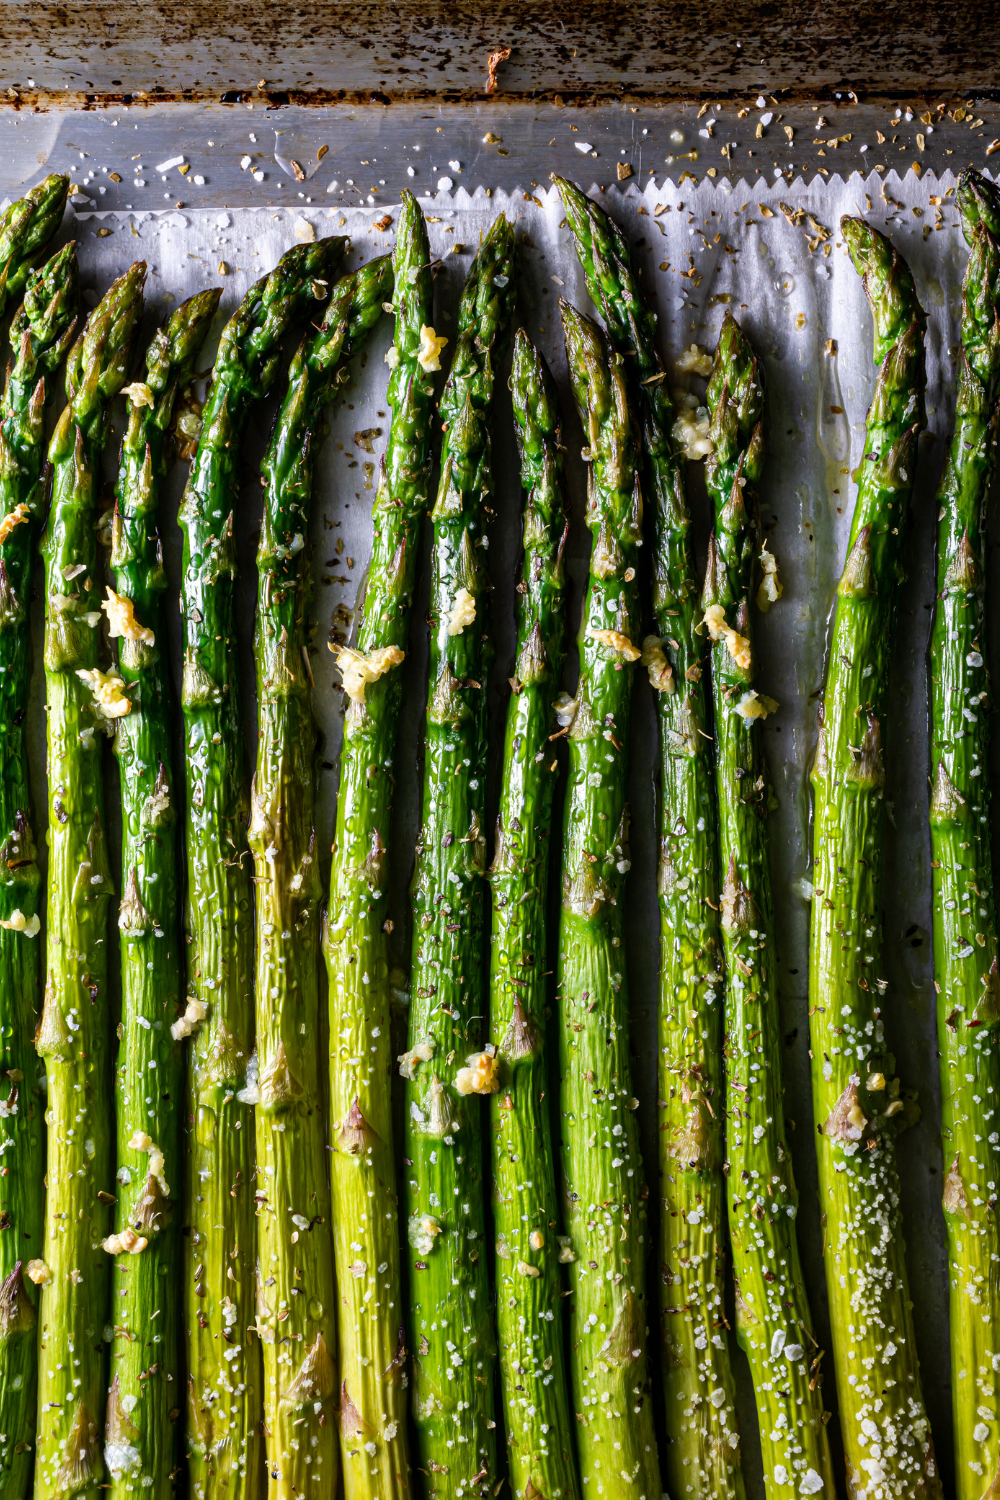 Roasted Asparagus With Cheese and Seasonings